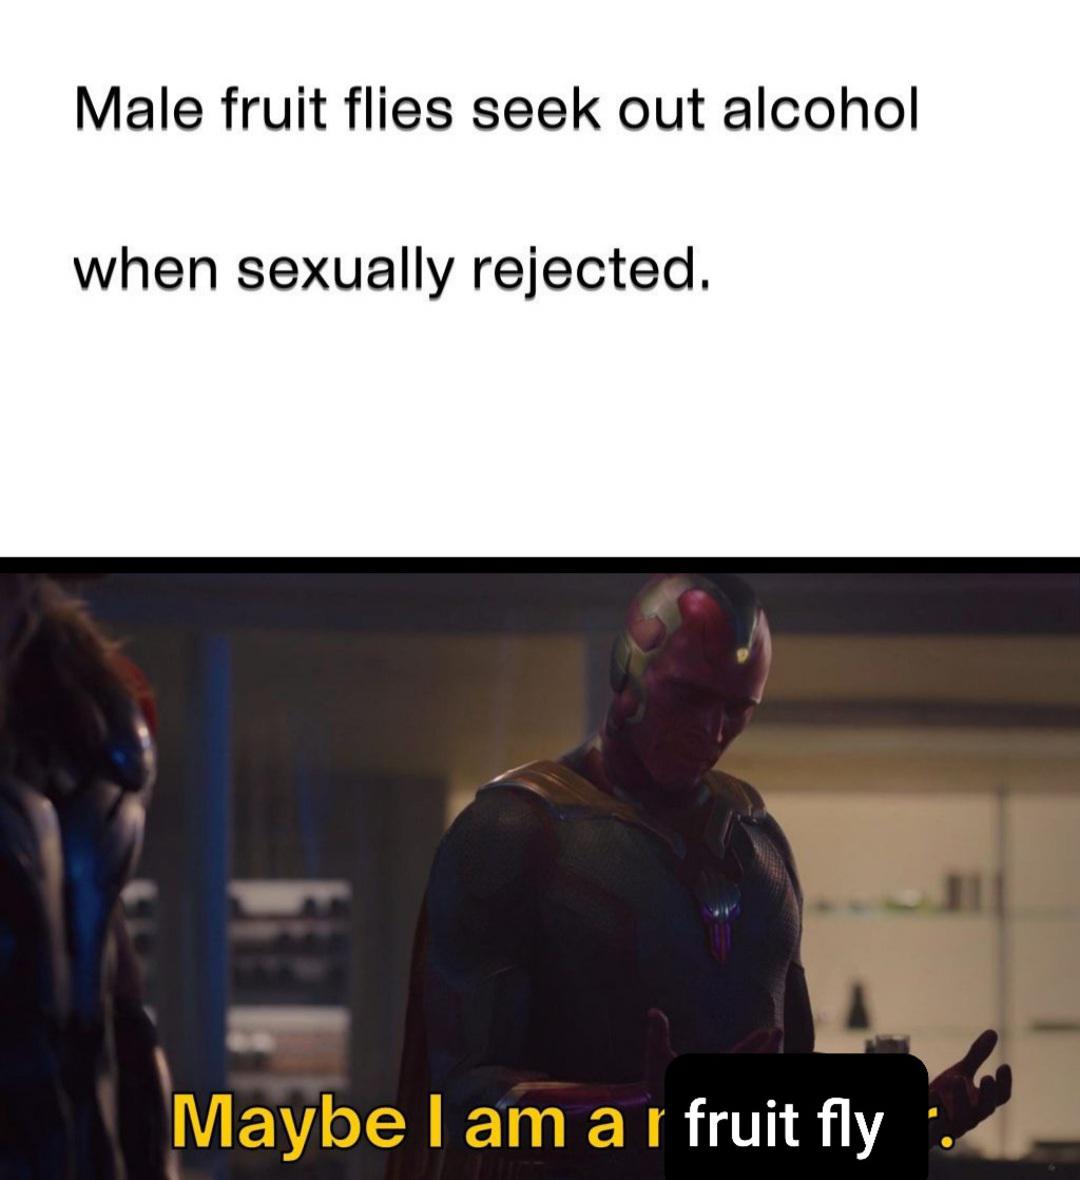 vision maybe i am meme - Male fruit flies seek out alcohol when sexually rejected. Maybe I am a r fruit fly